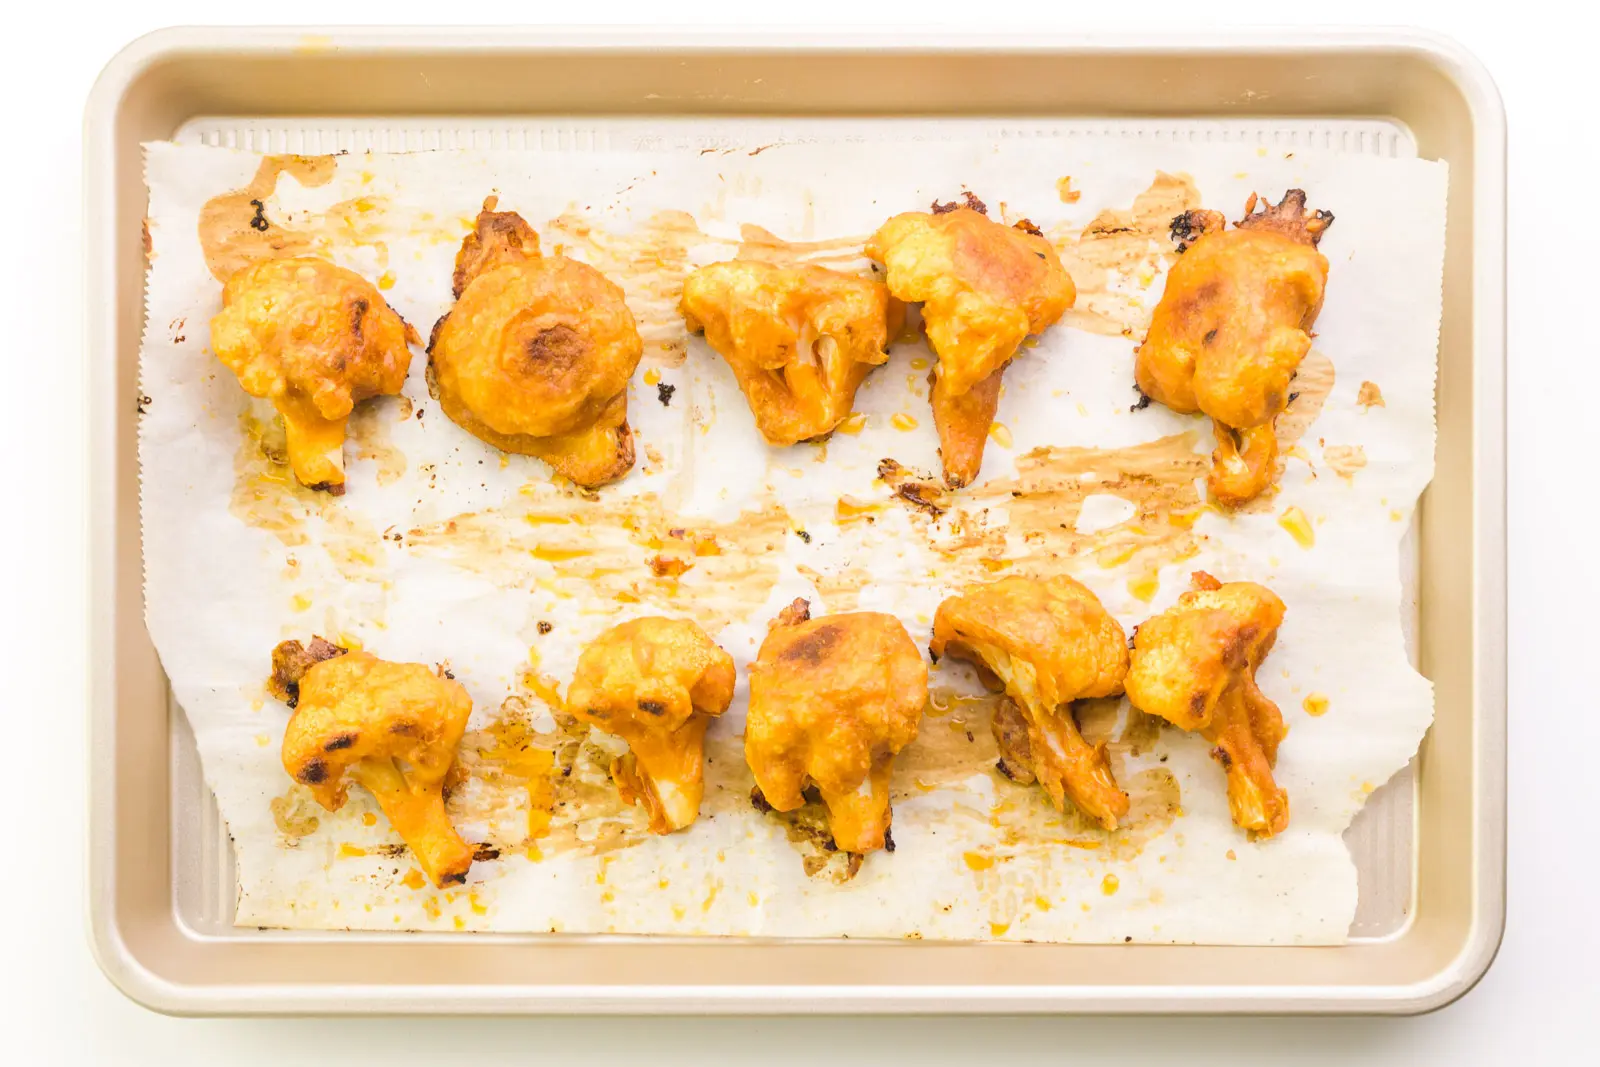 Cauliflower wings are lined up on a baking sheet lined with parchment paper. They're golden brown in spots.